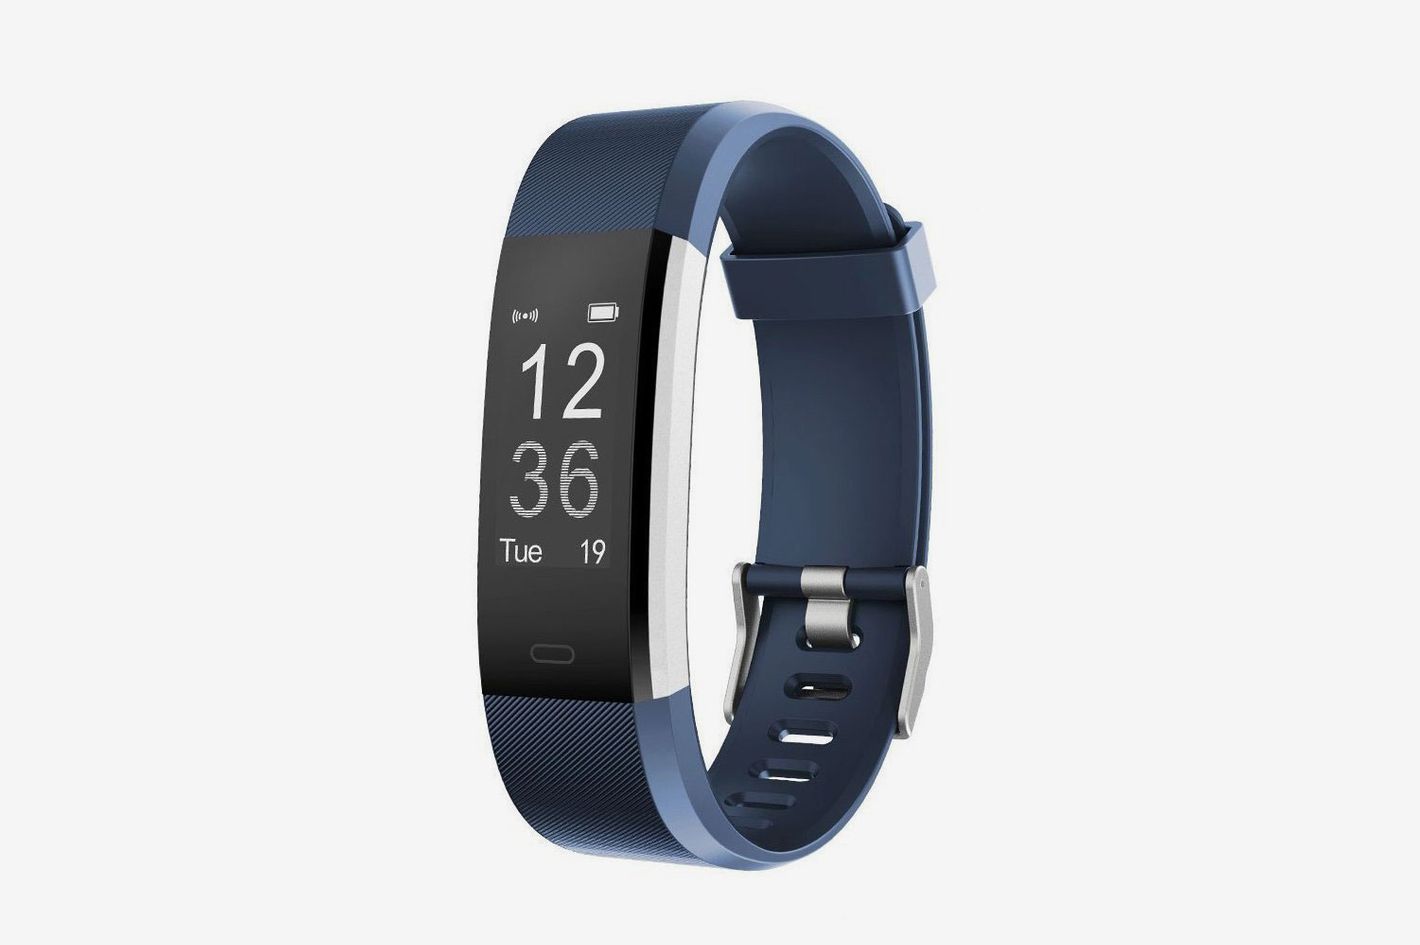 9 Best Fitness Trackers 2019